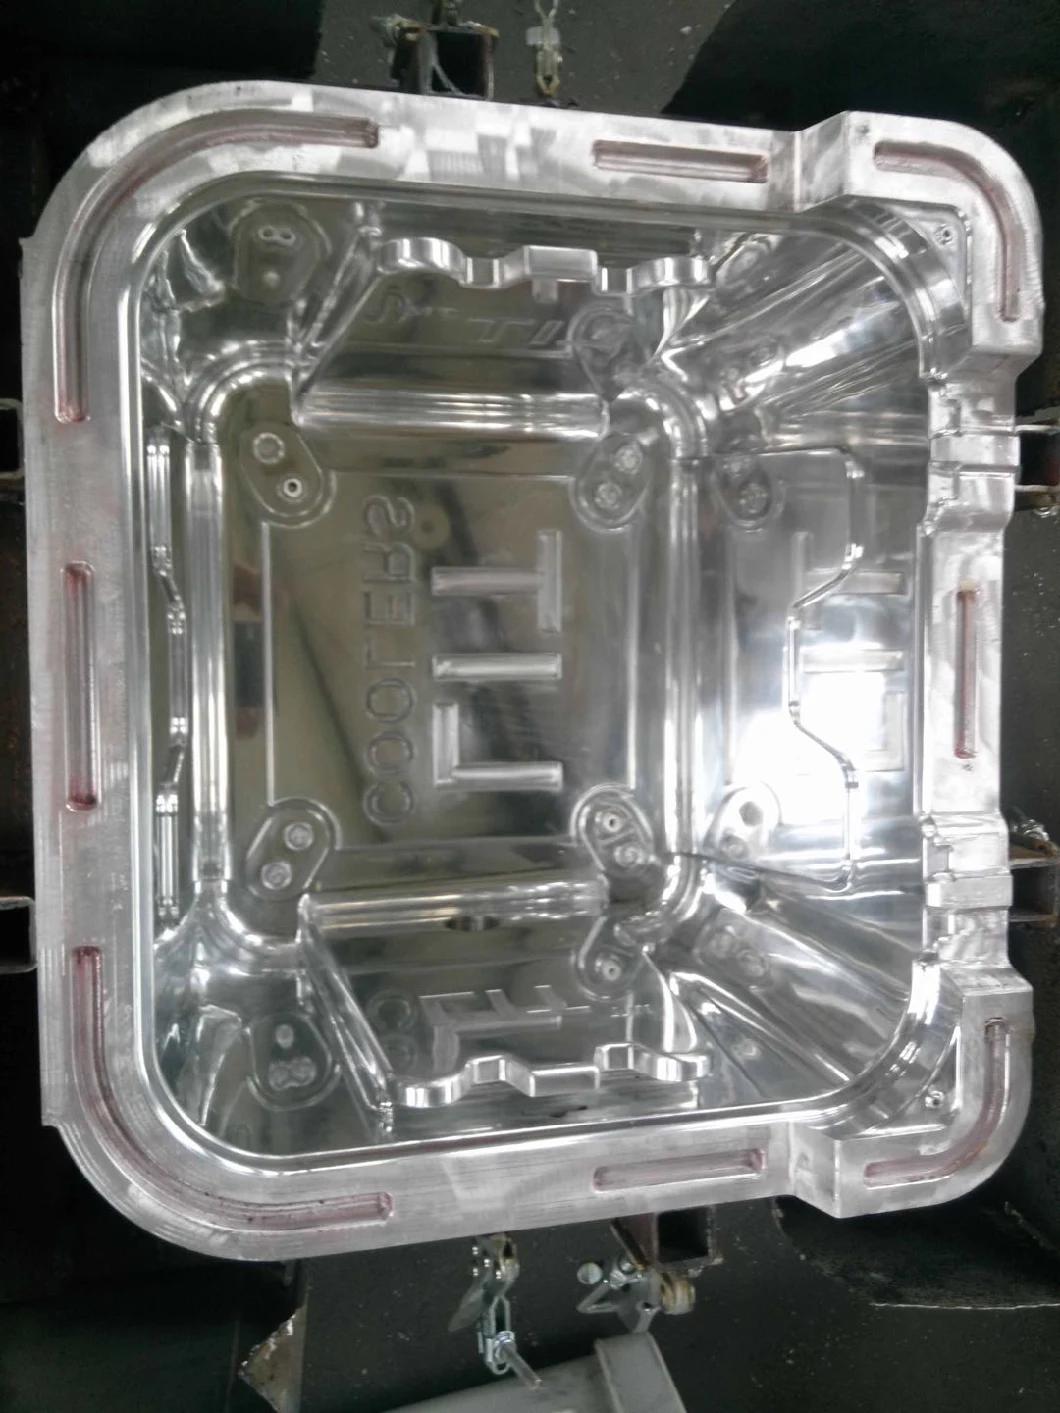 OEM ODM Plastic Products Mold for Rotational Molding Fishing Boat Kayak Aluminum Mould with Mirror Polishing Cooler Box Tooling